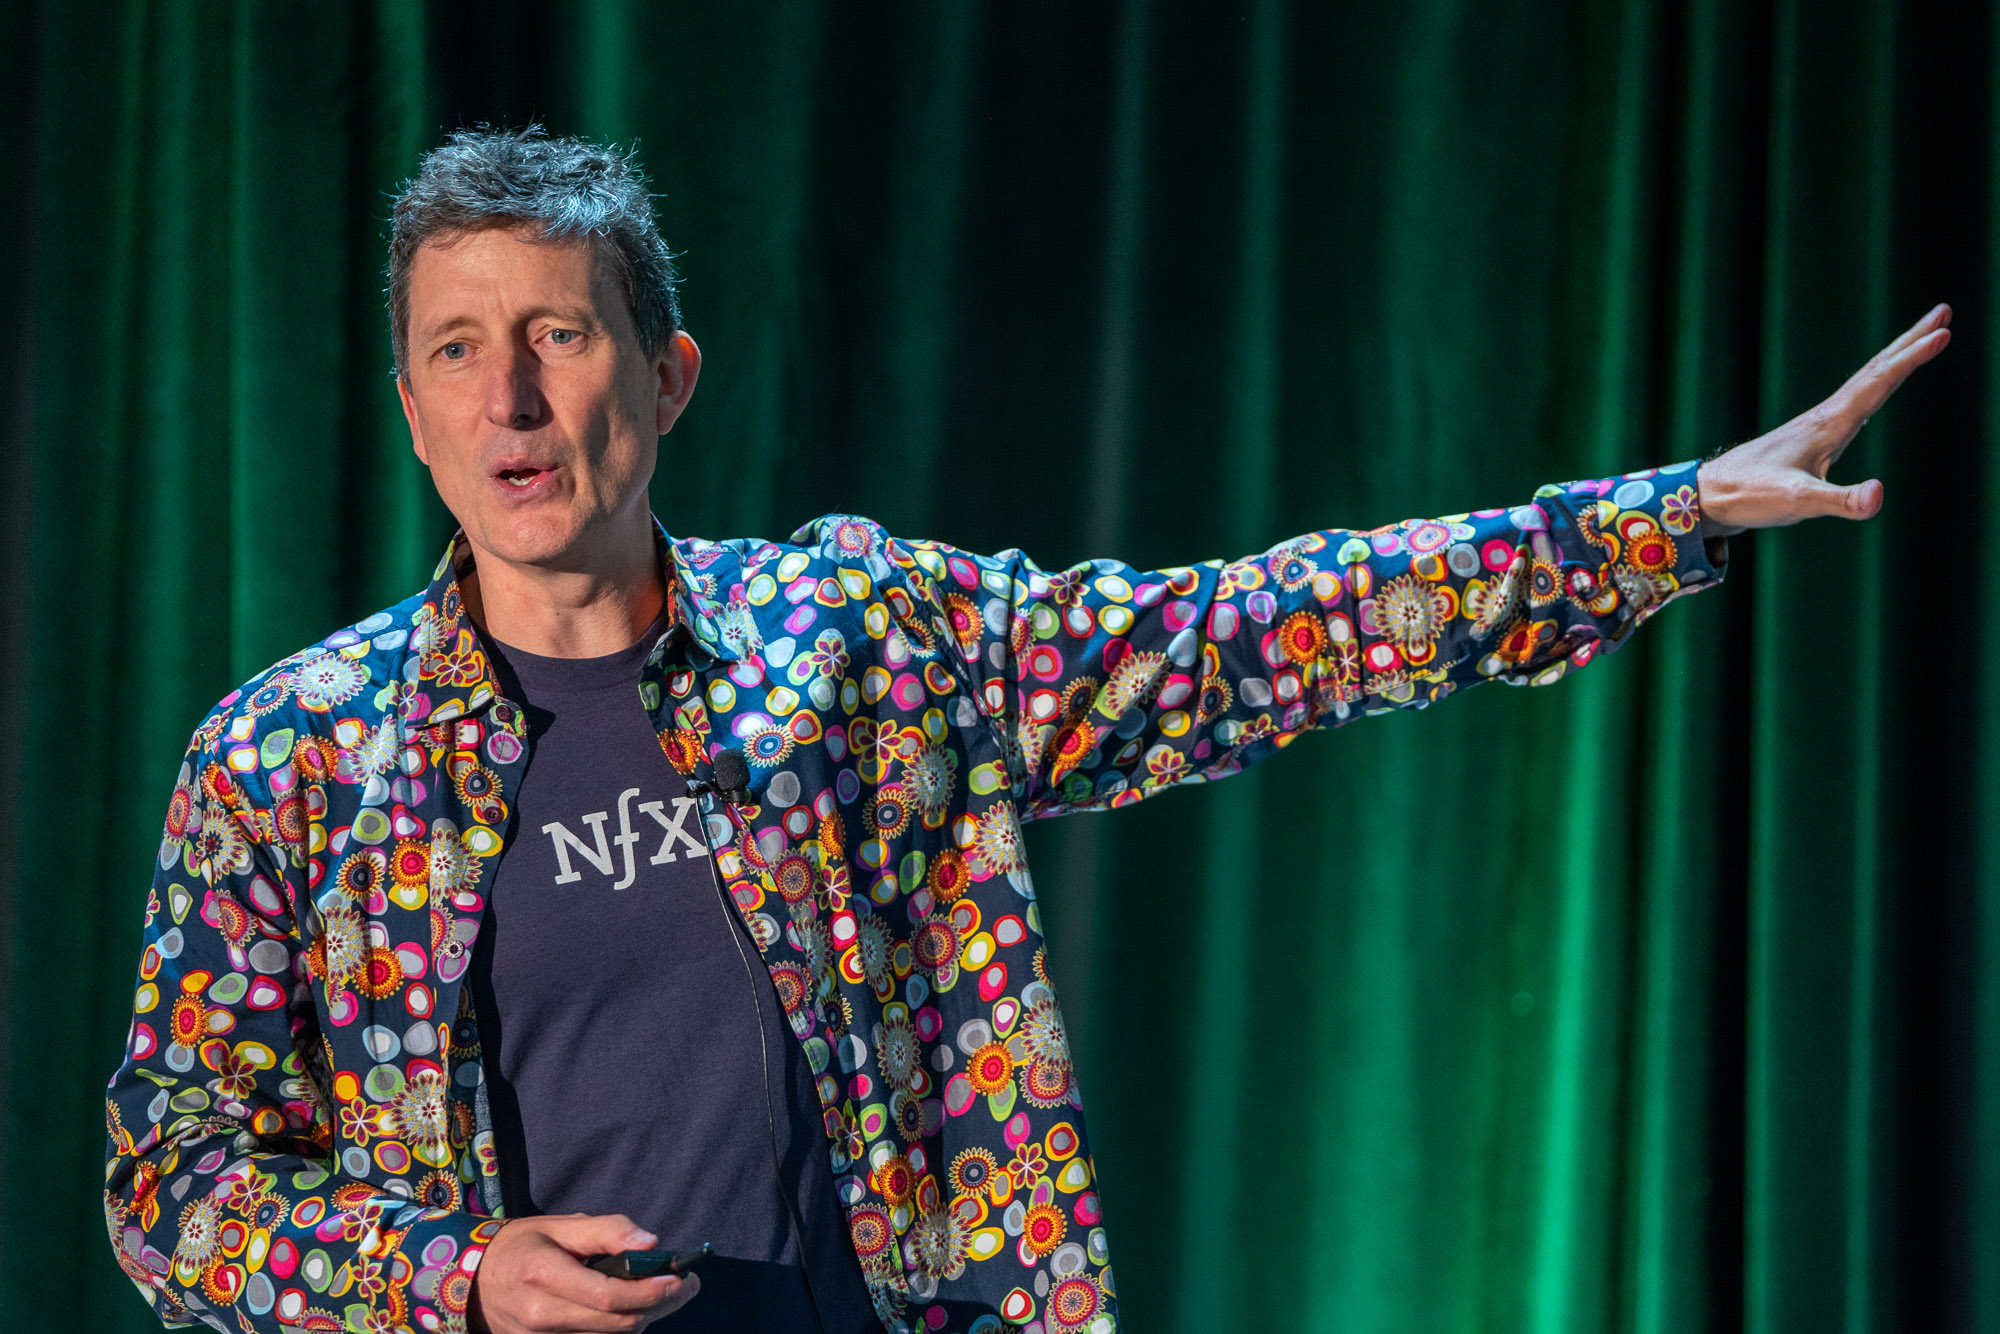 James Currier, GP at NfX talks about "Where Unicorn Ideas Come From" at TechCrunch Early Stage in Boston on April 20, 2023. Image Credit: Haje Kamps / TechCrunch